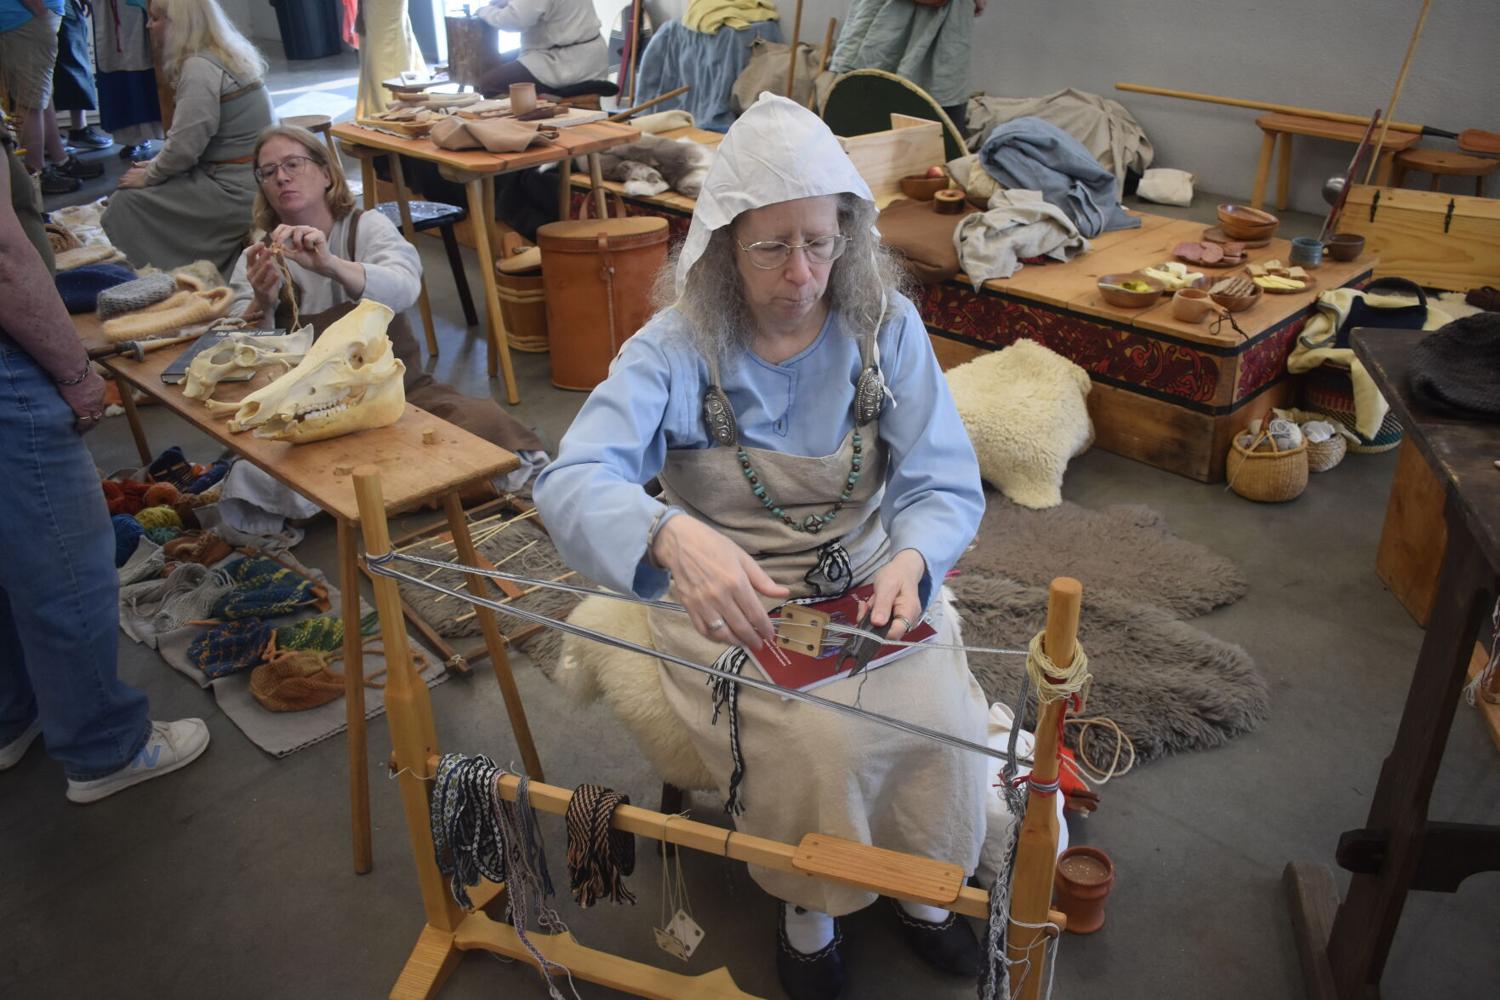 Artisans from far and wide visit Frederick Fiber Fest for fun and